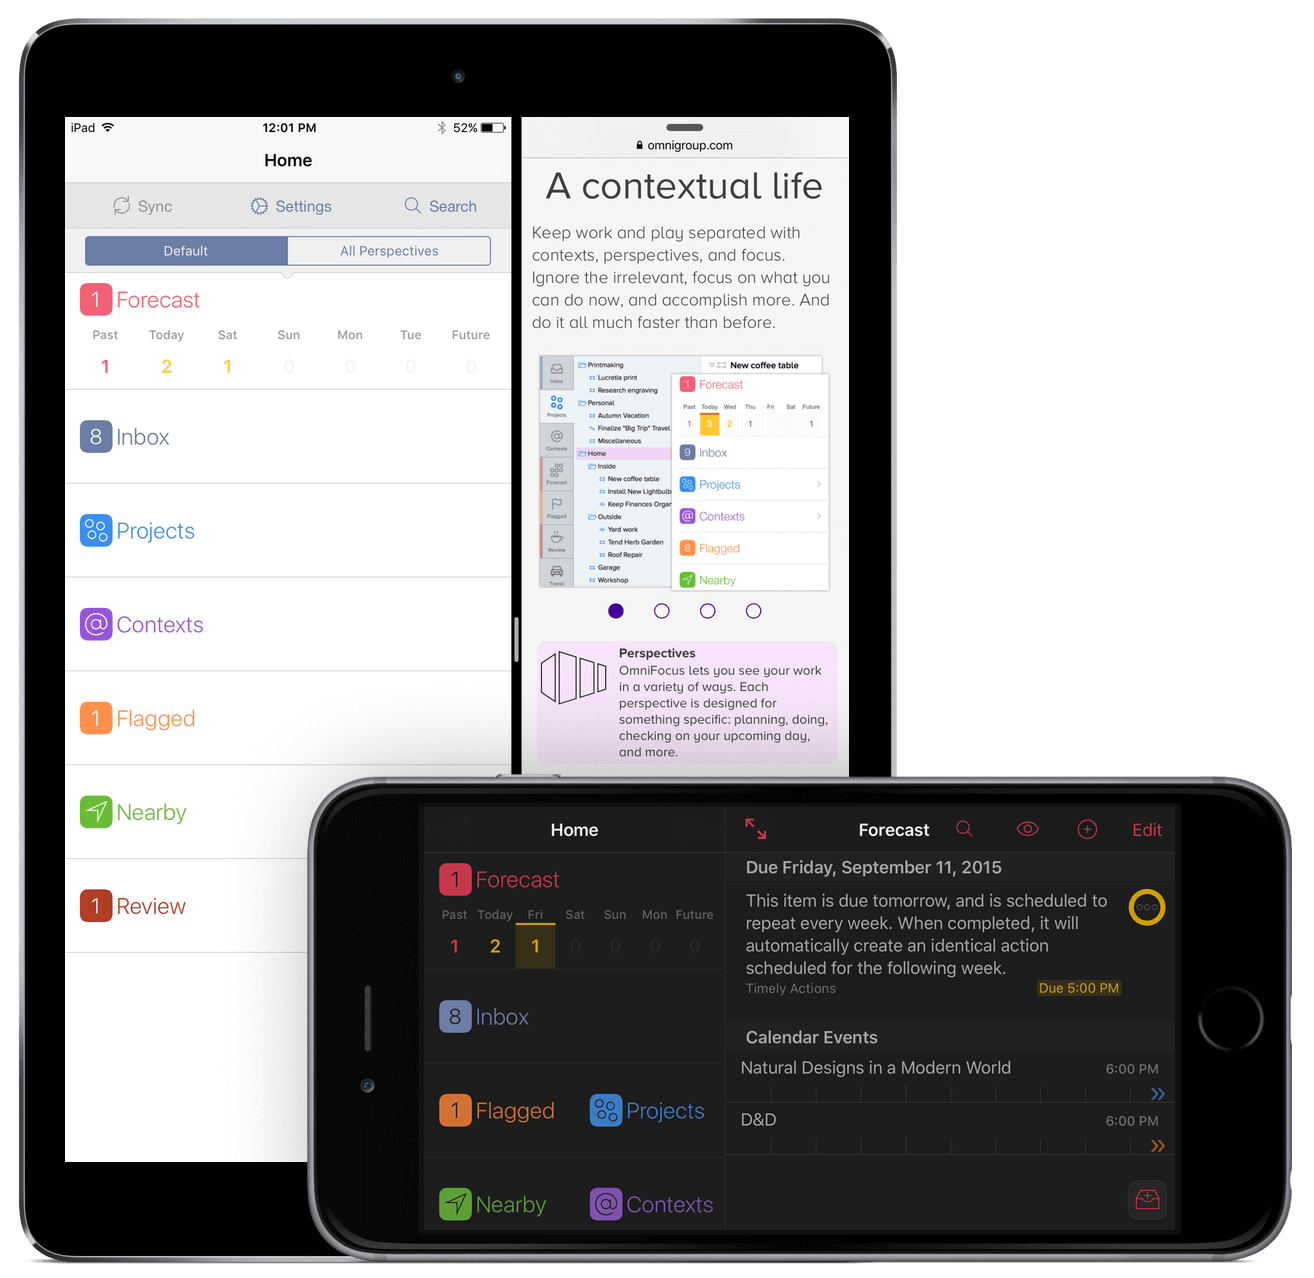 OmniFocus 2 for iOS in landscape orientation on iPhone 6 Plus, and in portrait orientation on iPad Air 2.